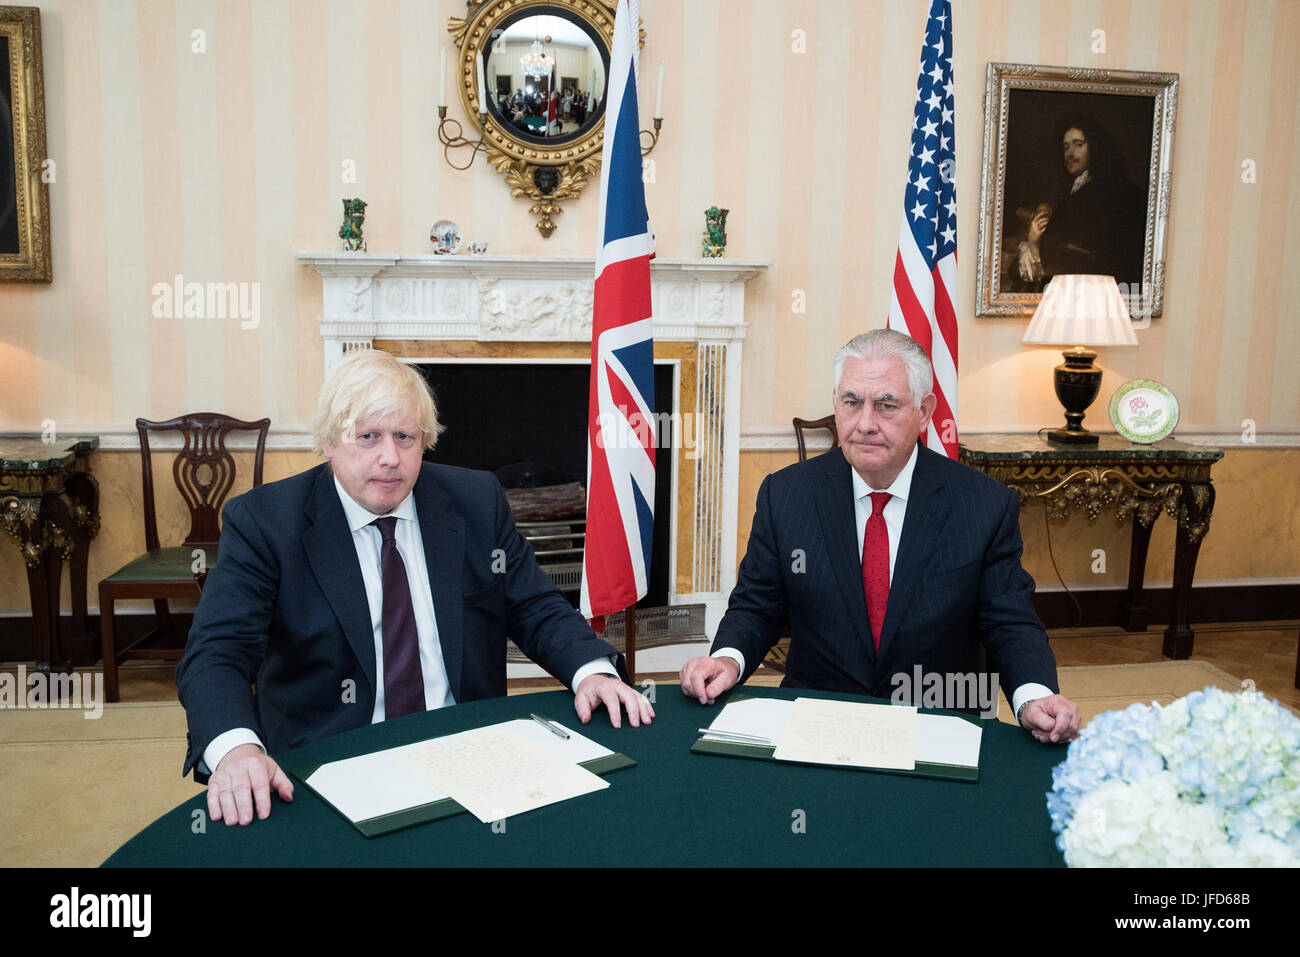 U.S. Secretary of State Rex Tillerson and U.K. Foreign Secretary Boris Johnson before signing a condolence book for the victims of the terrorist attack in Manchester, at Carlton House in London, United Kingdom, on May 26, 2017. Stock Photo